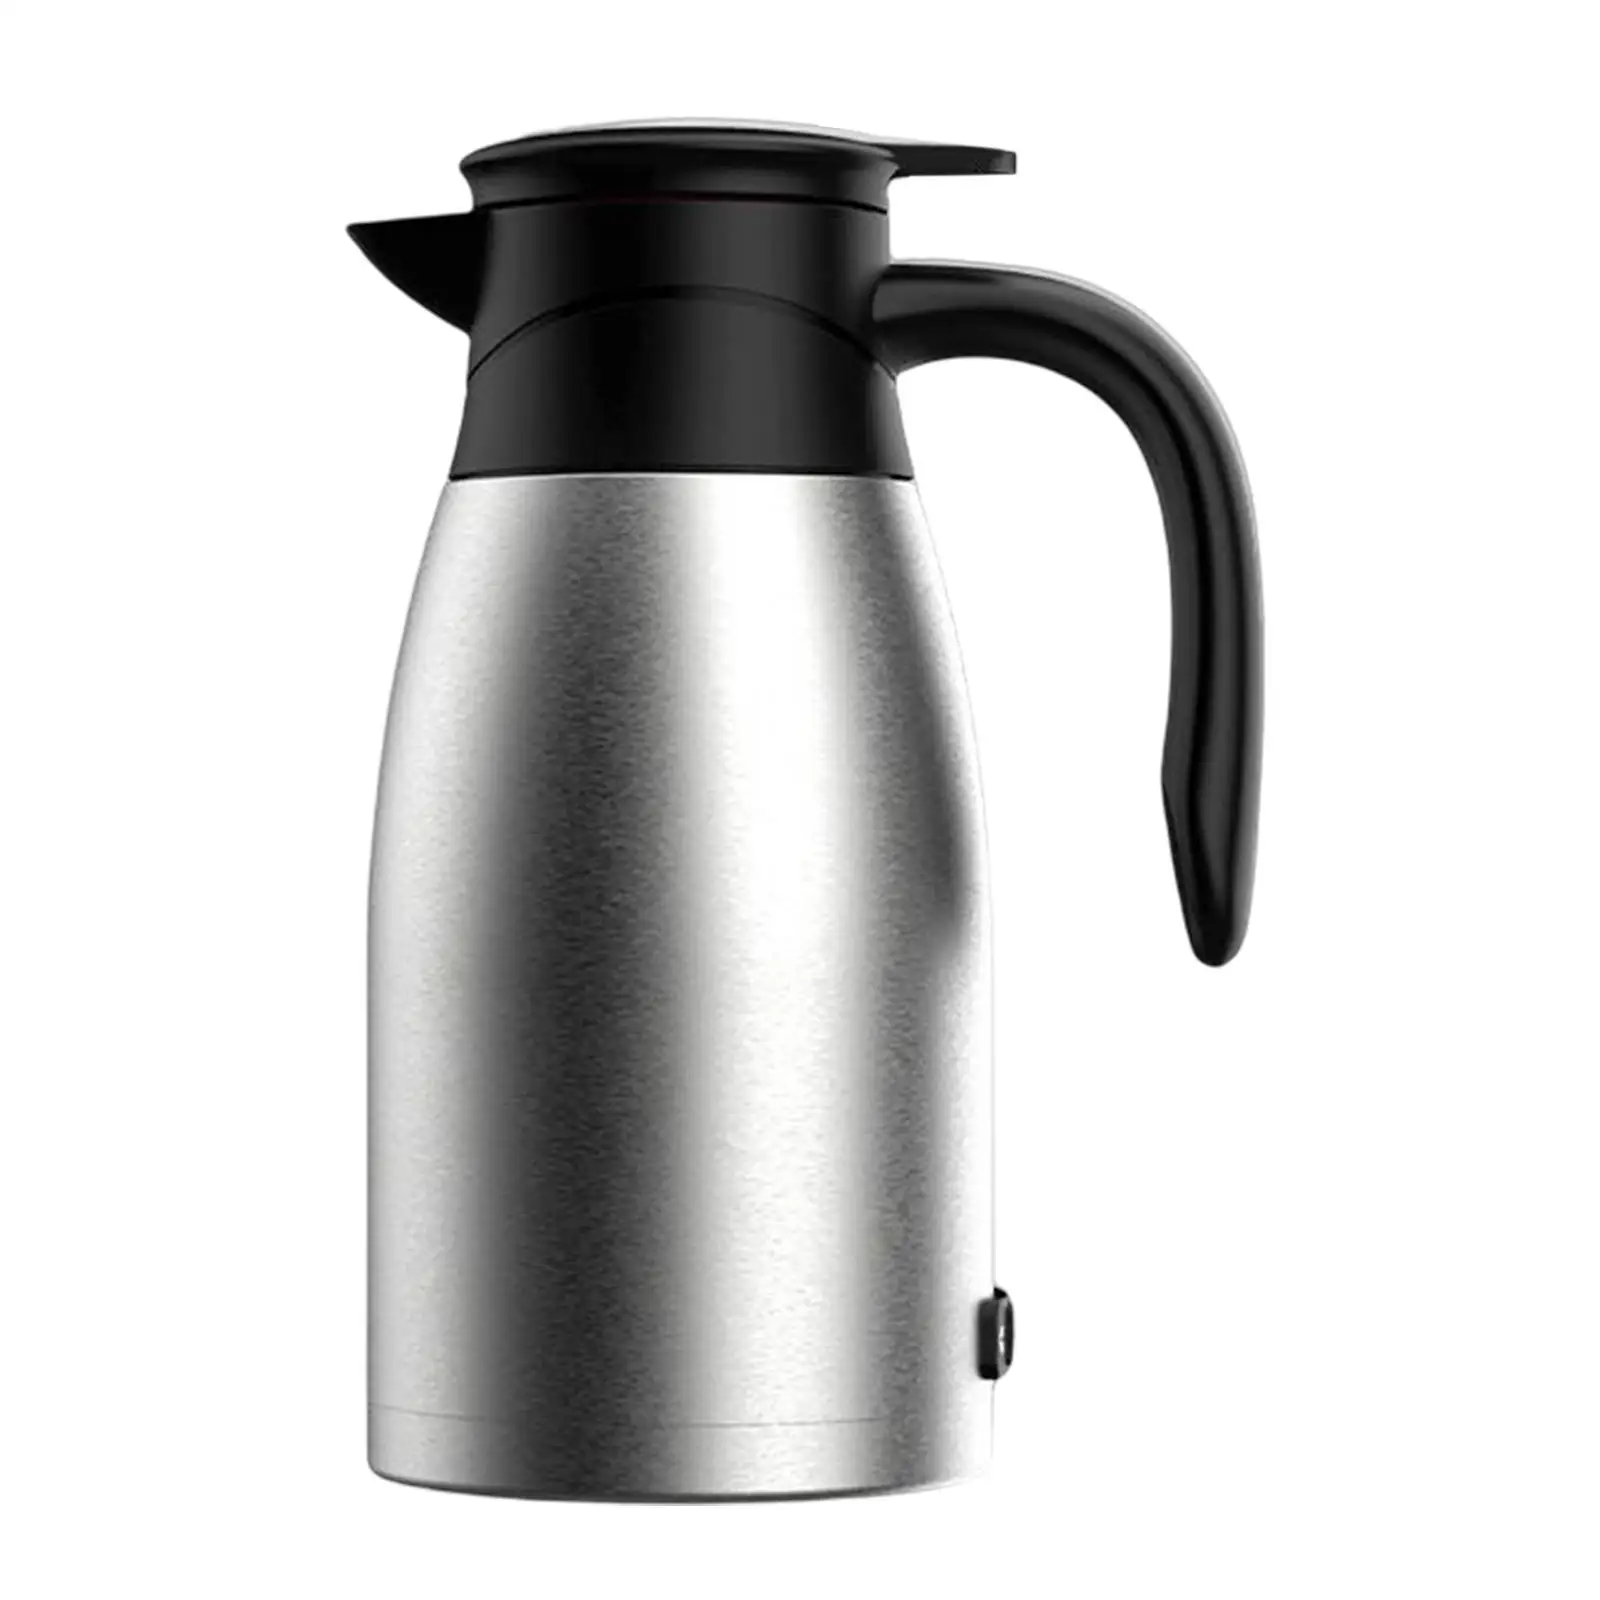 12V Car Kettle Boiler Temp Display Insulated 1400ml Hot Water Kettle Heated Water Boiler for Tea Water Travel